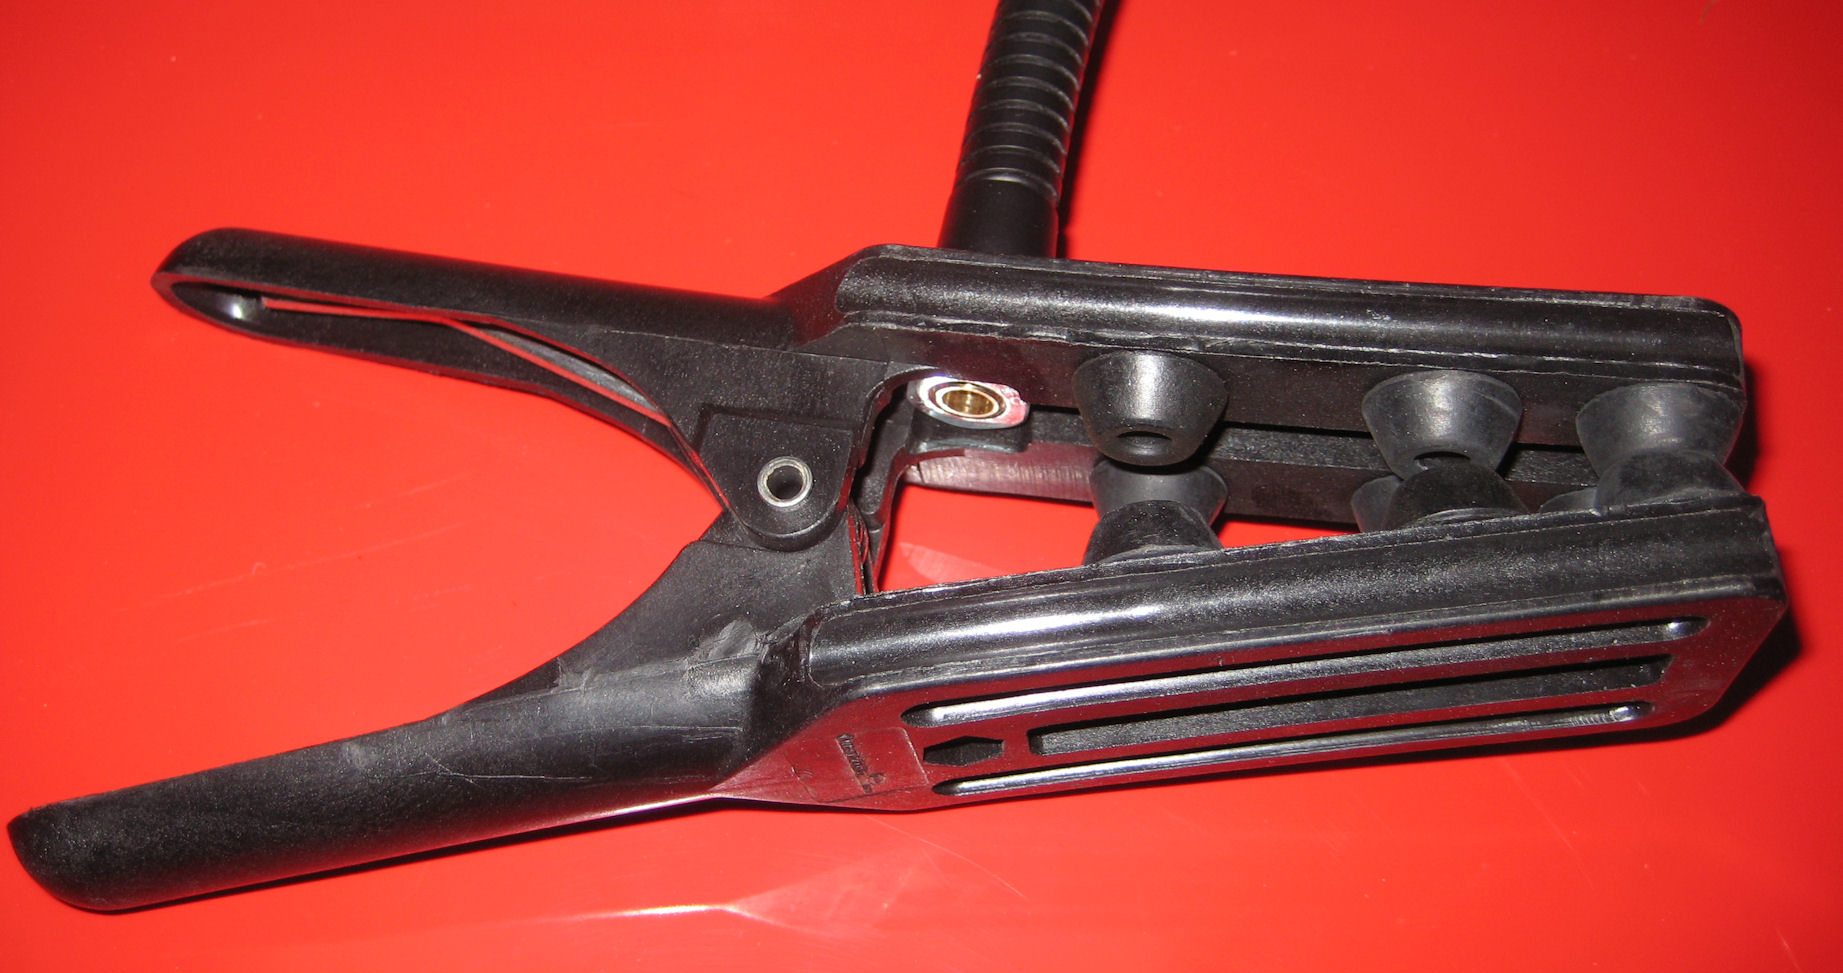 Clamp pliers with flex arm 480mm and cross handle